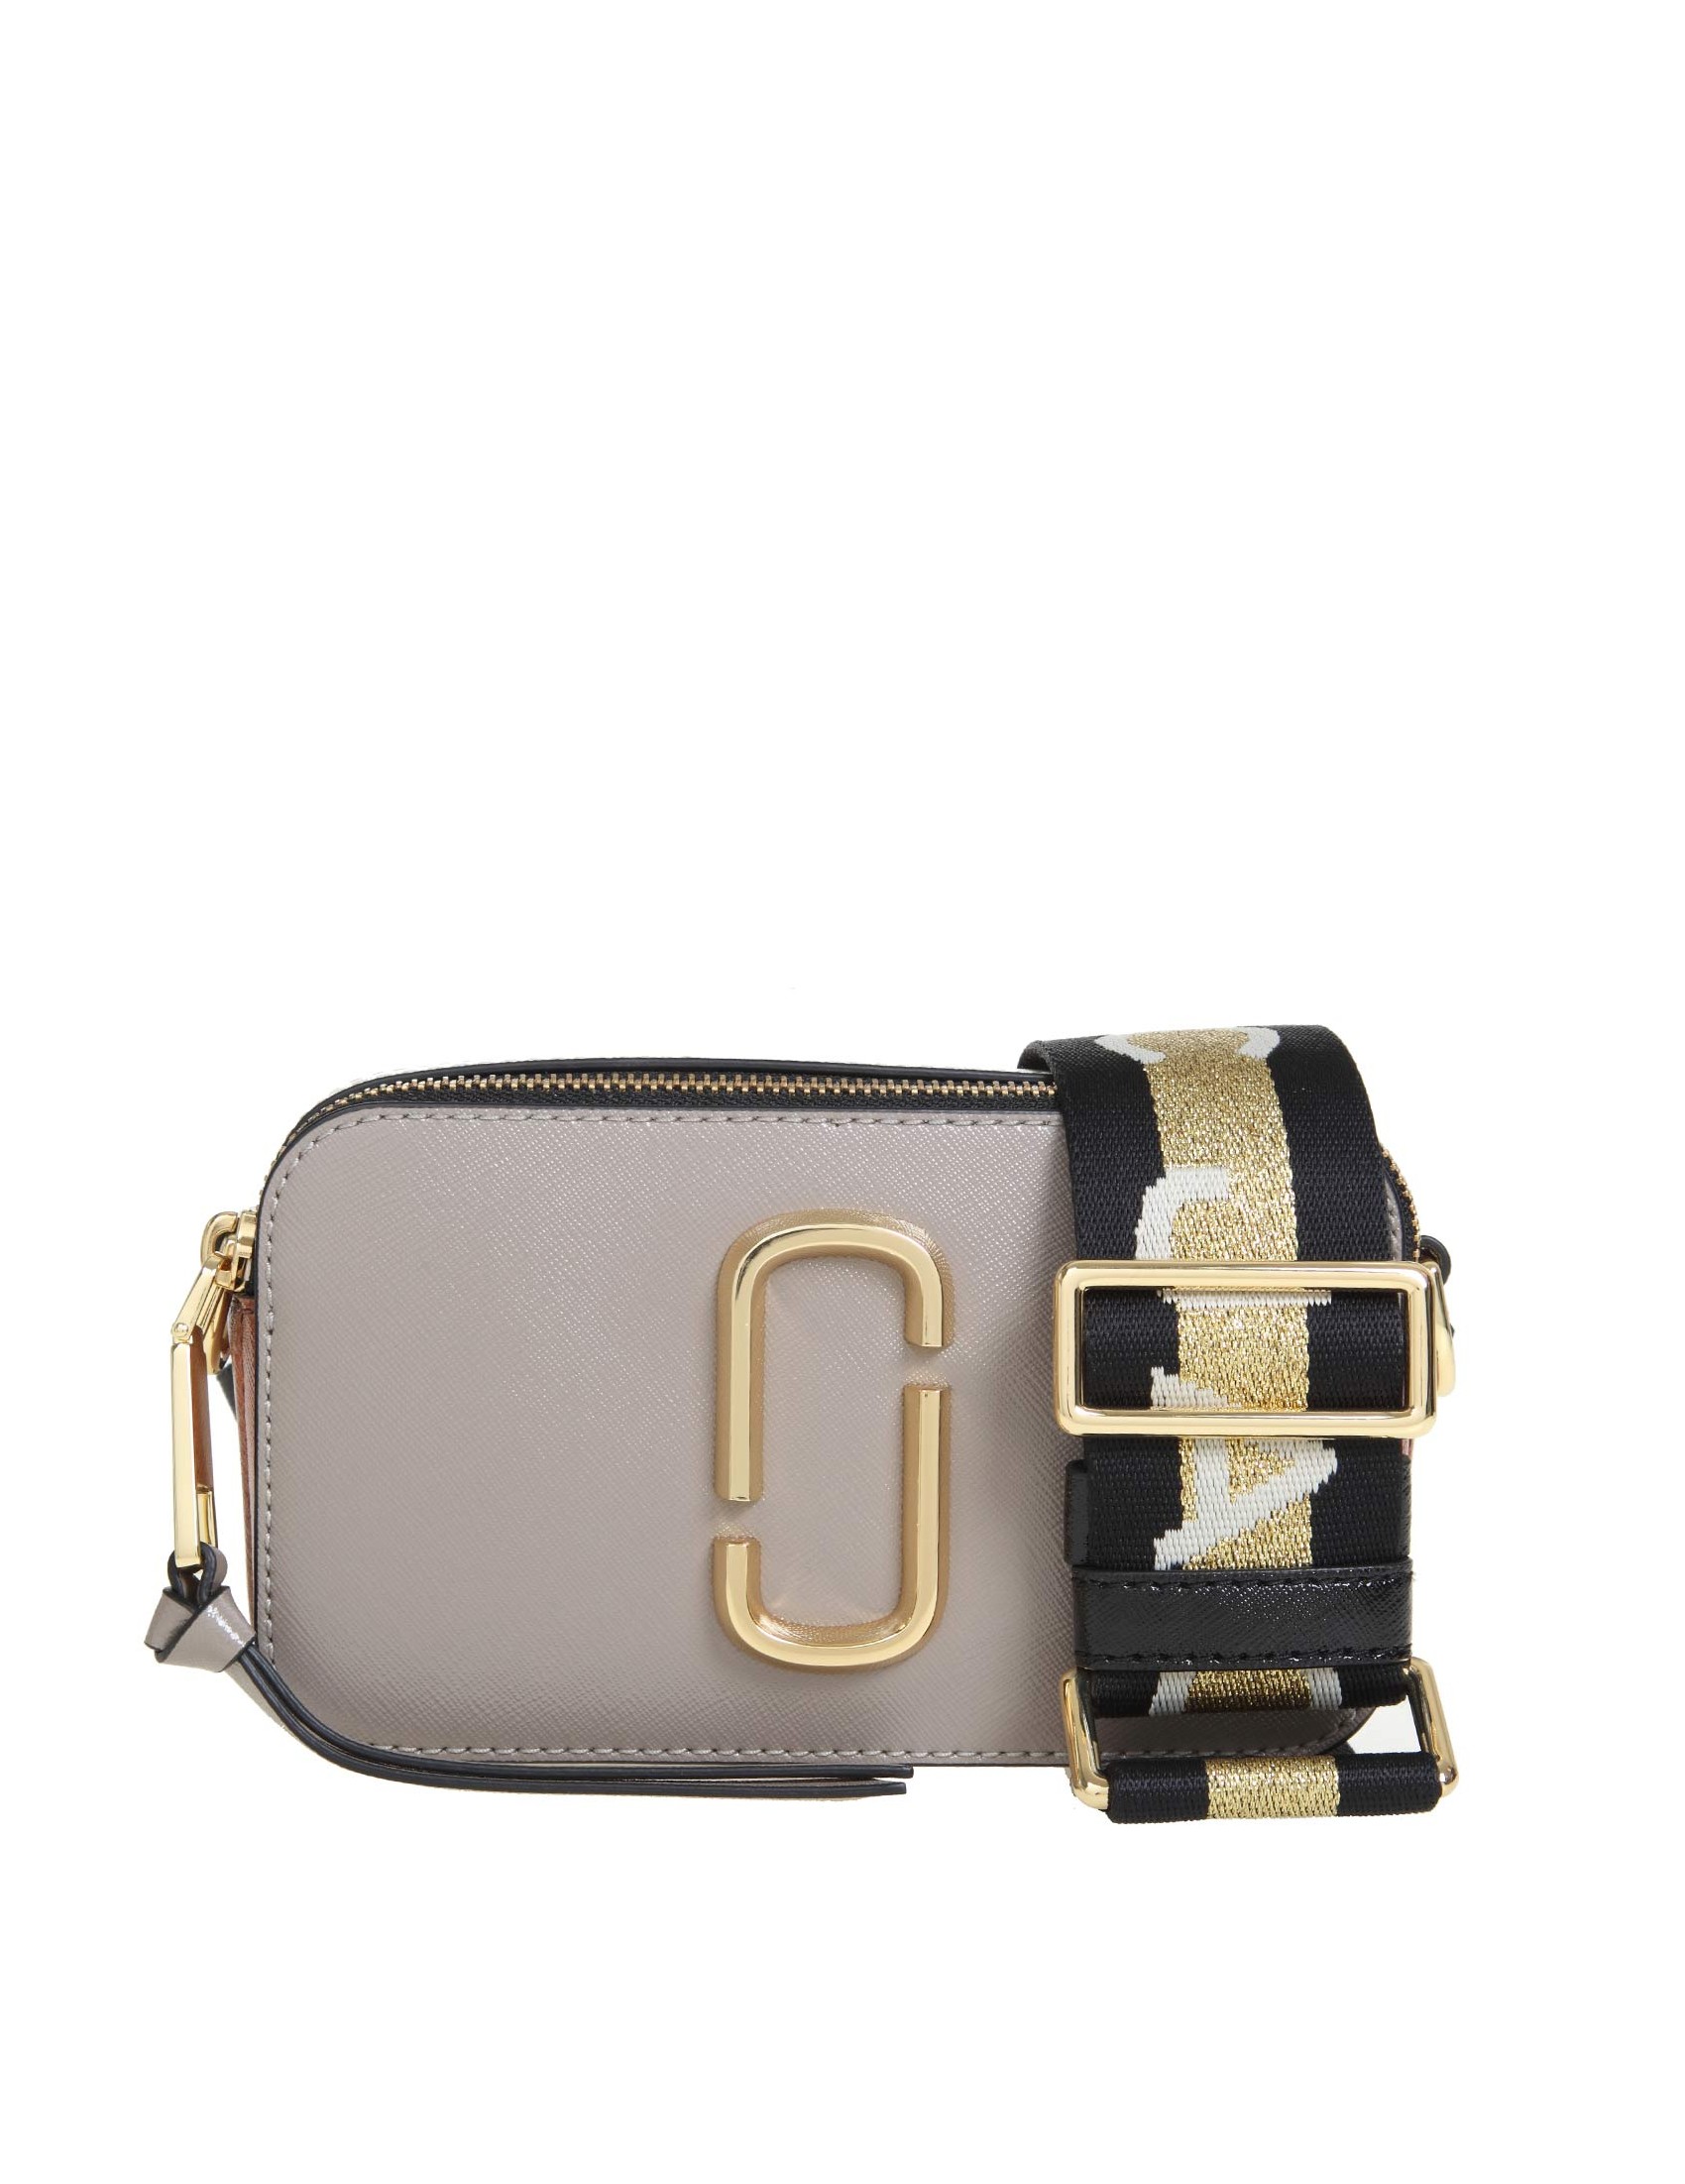 MARC JACOBS SNAPSHOT BAG IN POWDER COLOR LEATHER